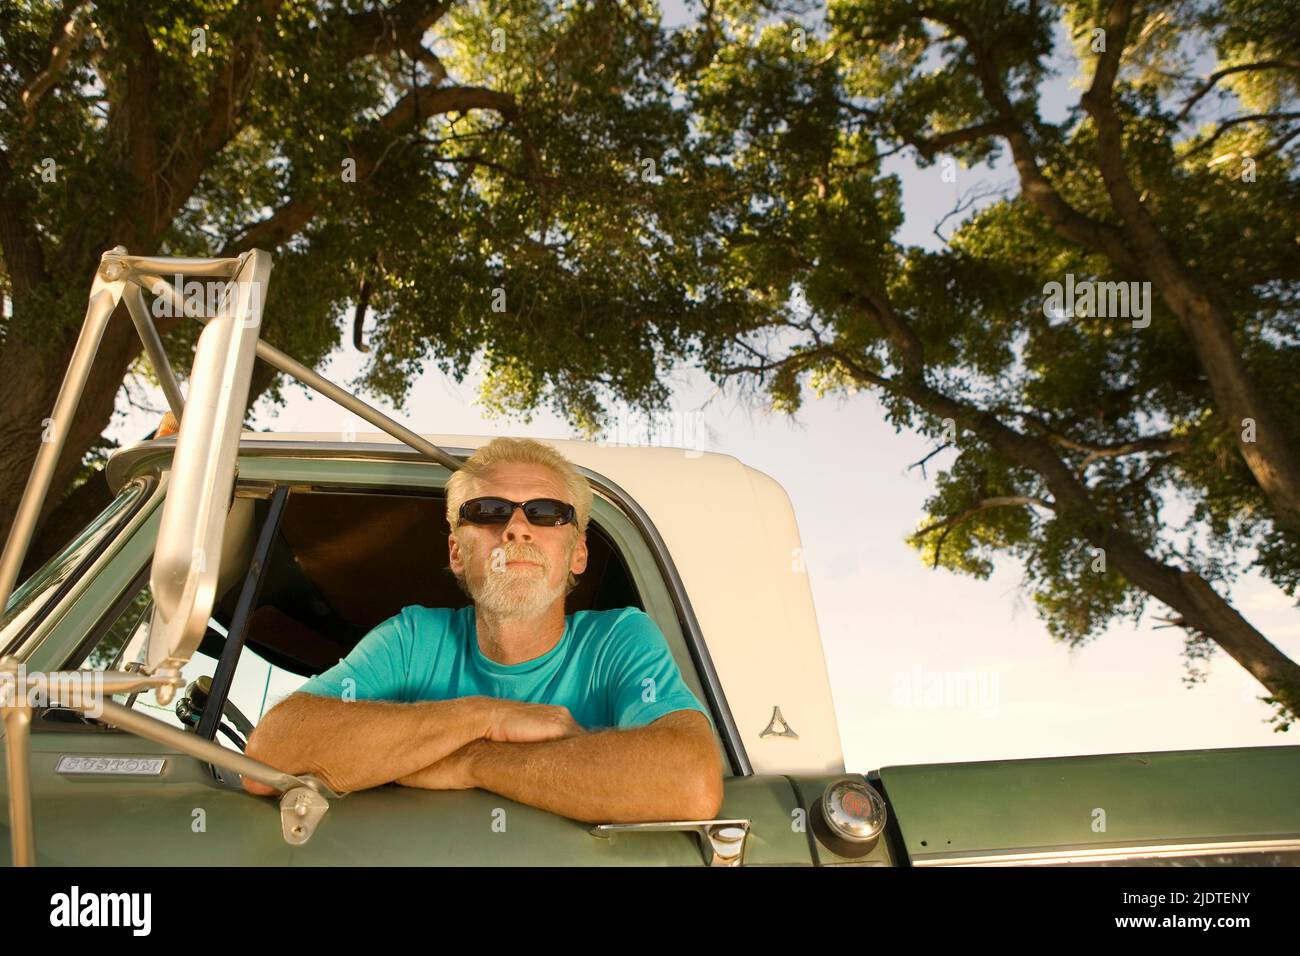 Blonde man ( aged 40-60) with beard wearing sunglasses leaning out the window of a vintage pick up truck parked in a rural area. Stock Photo